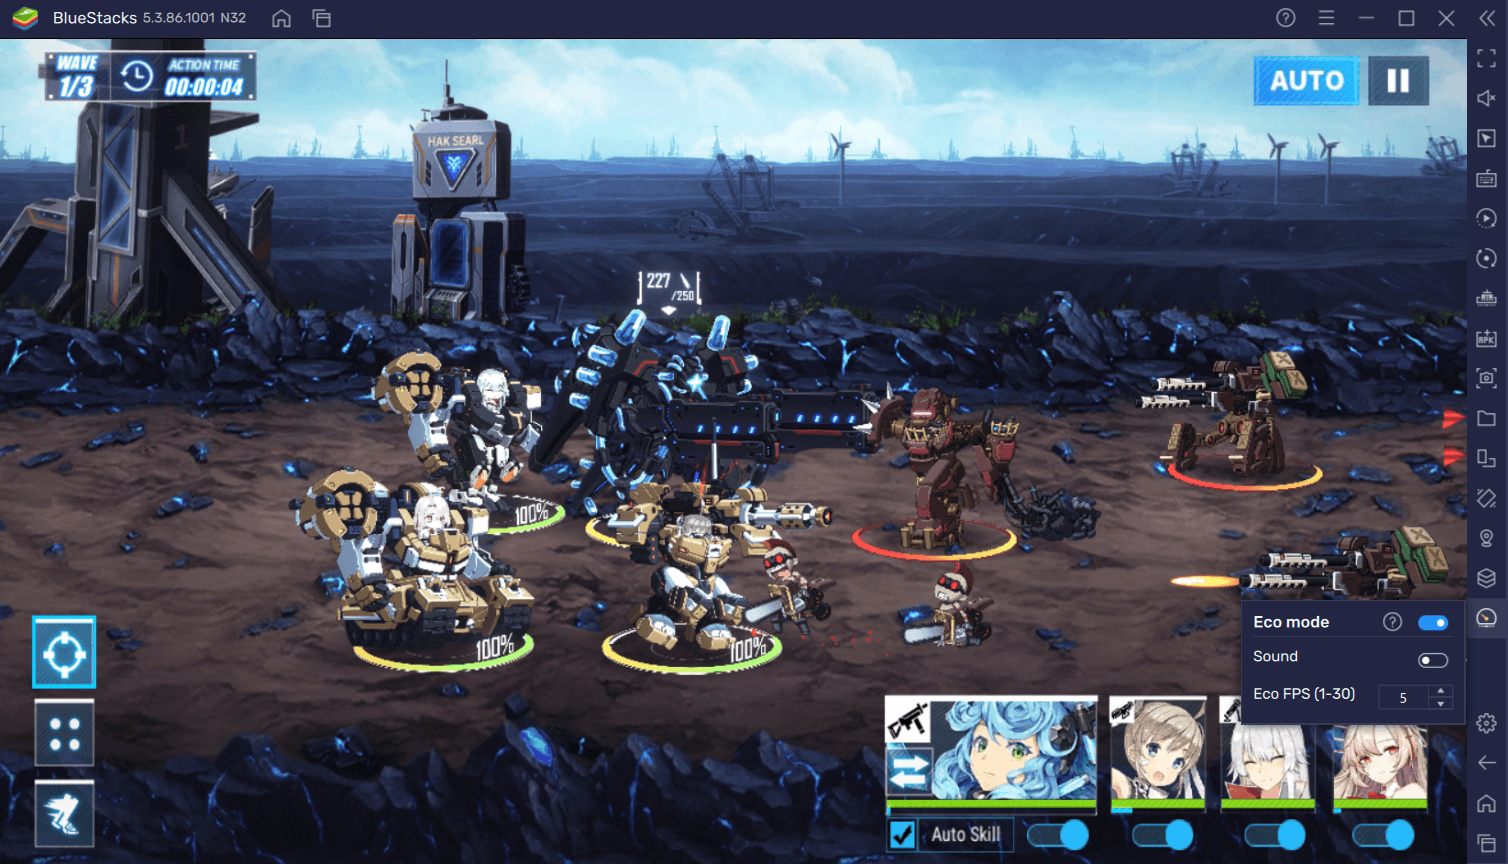 Final Gear: Use BlueStacks Features To Increase Efficiency and Ease of Playing